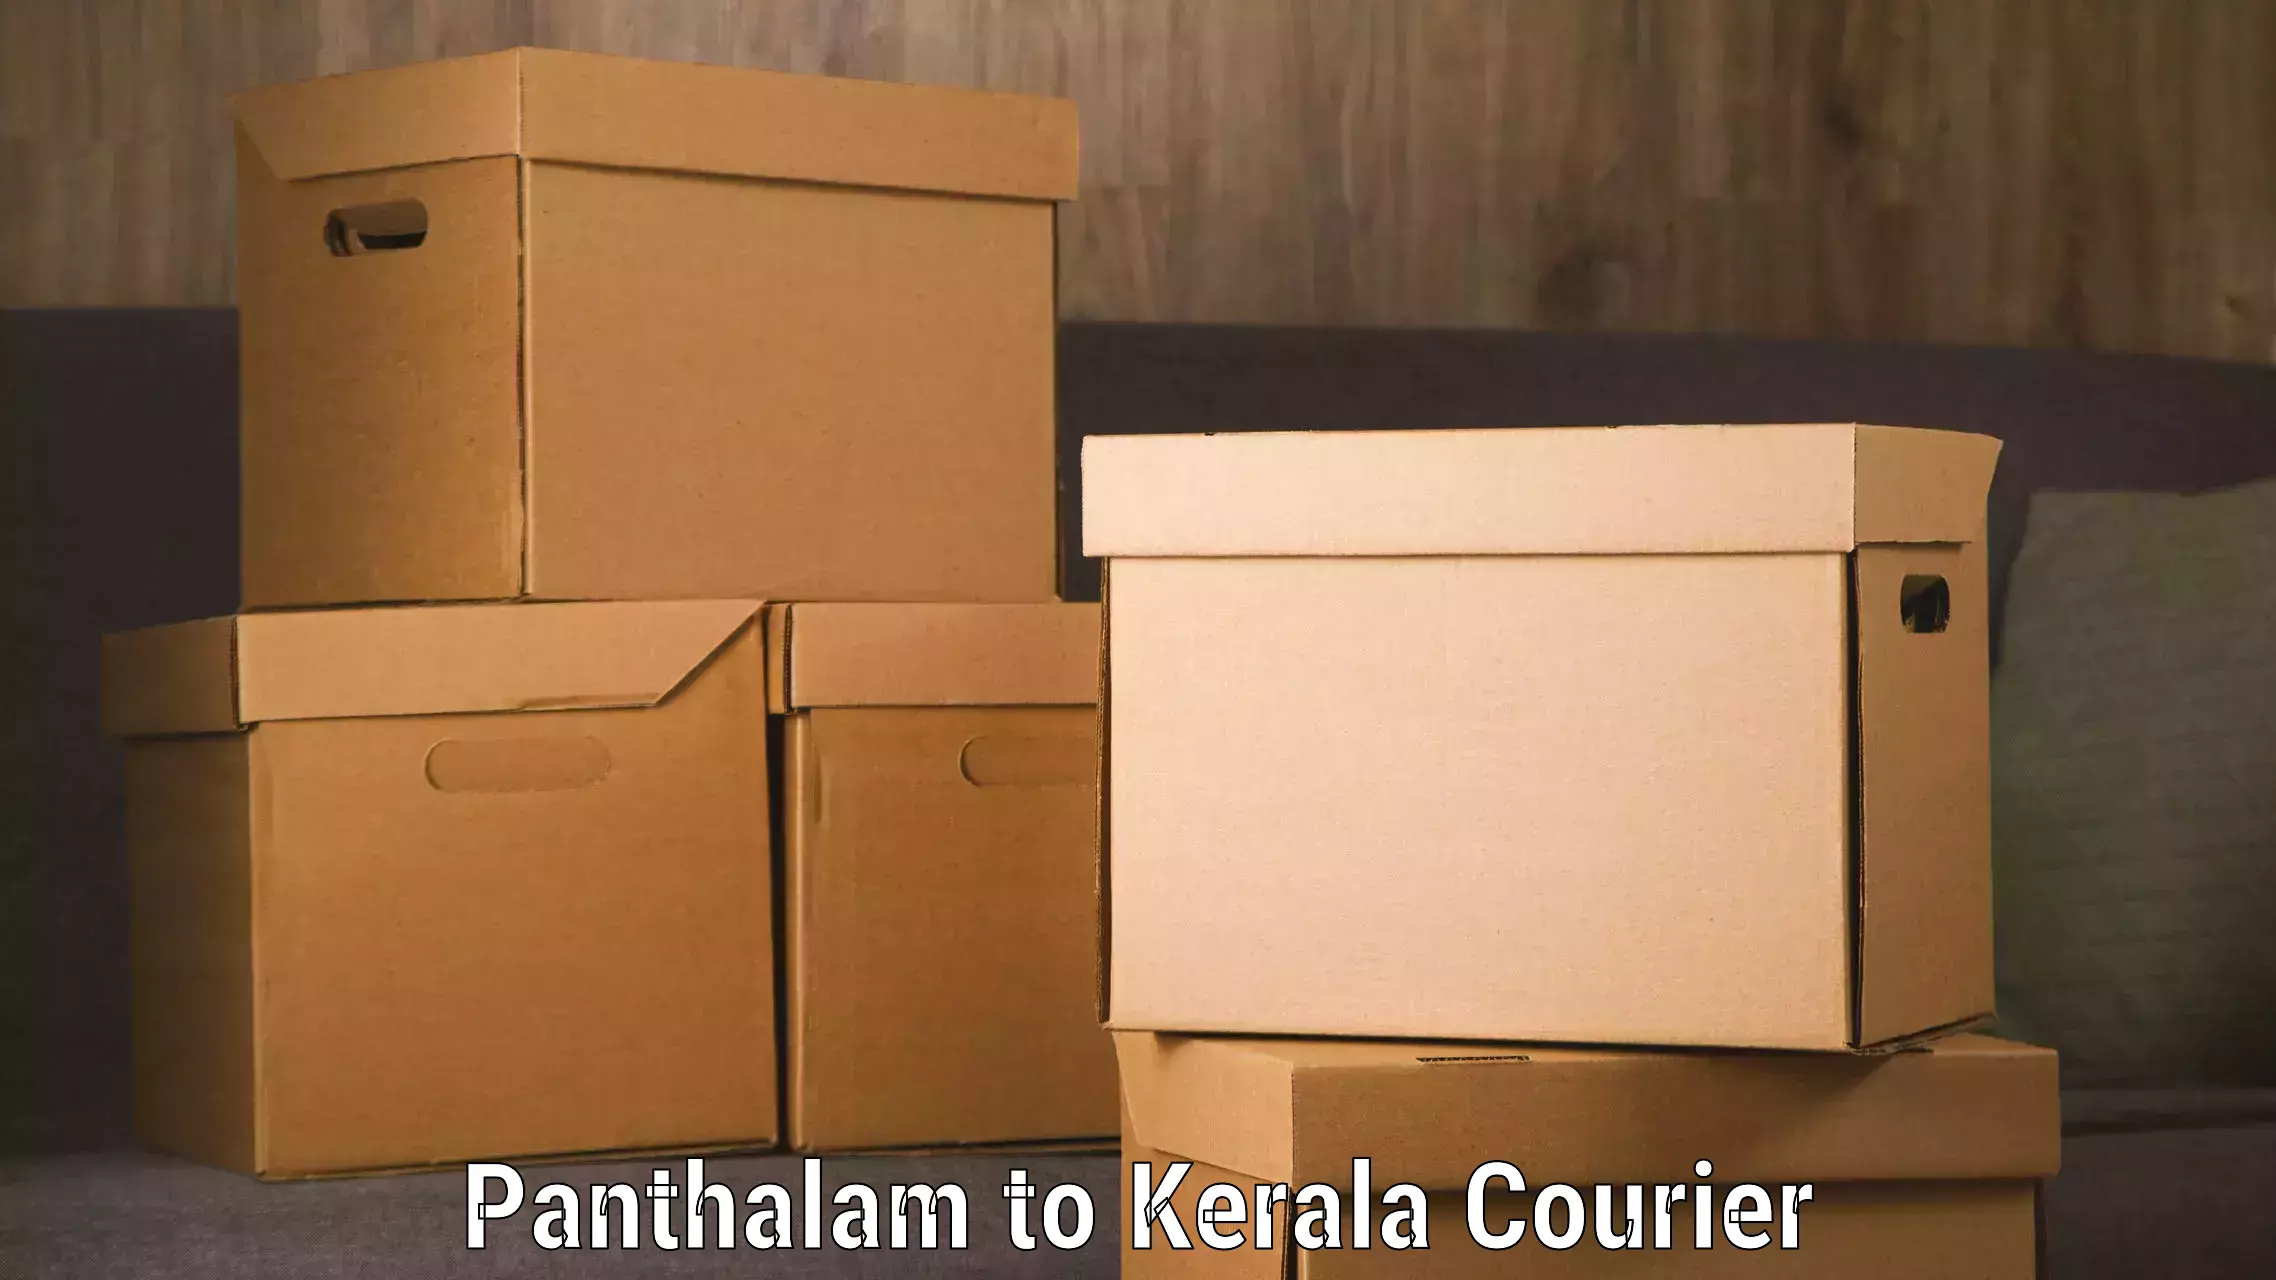 24-hour courier service Panthalam to Cochin University of Science and Technology